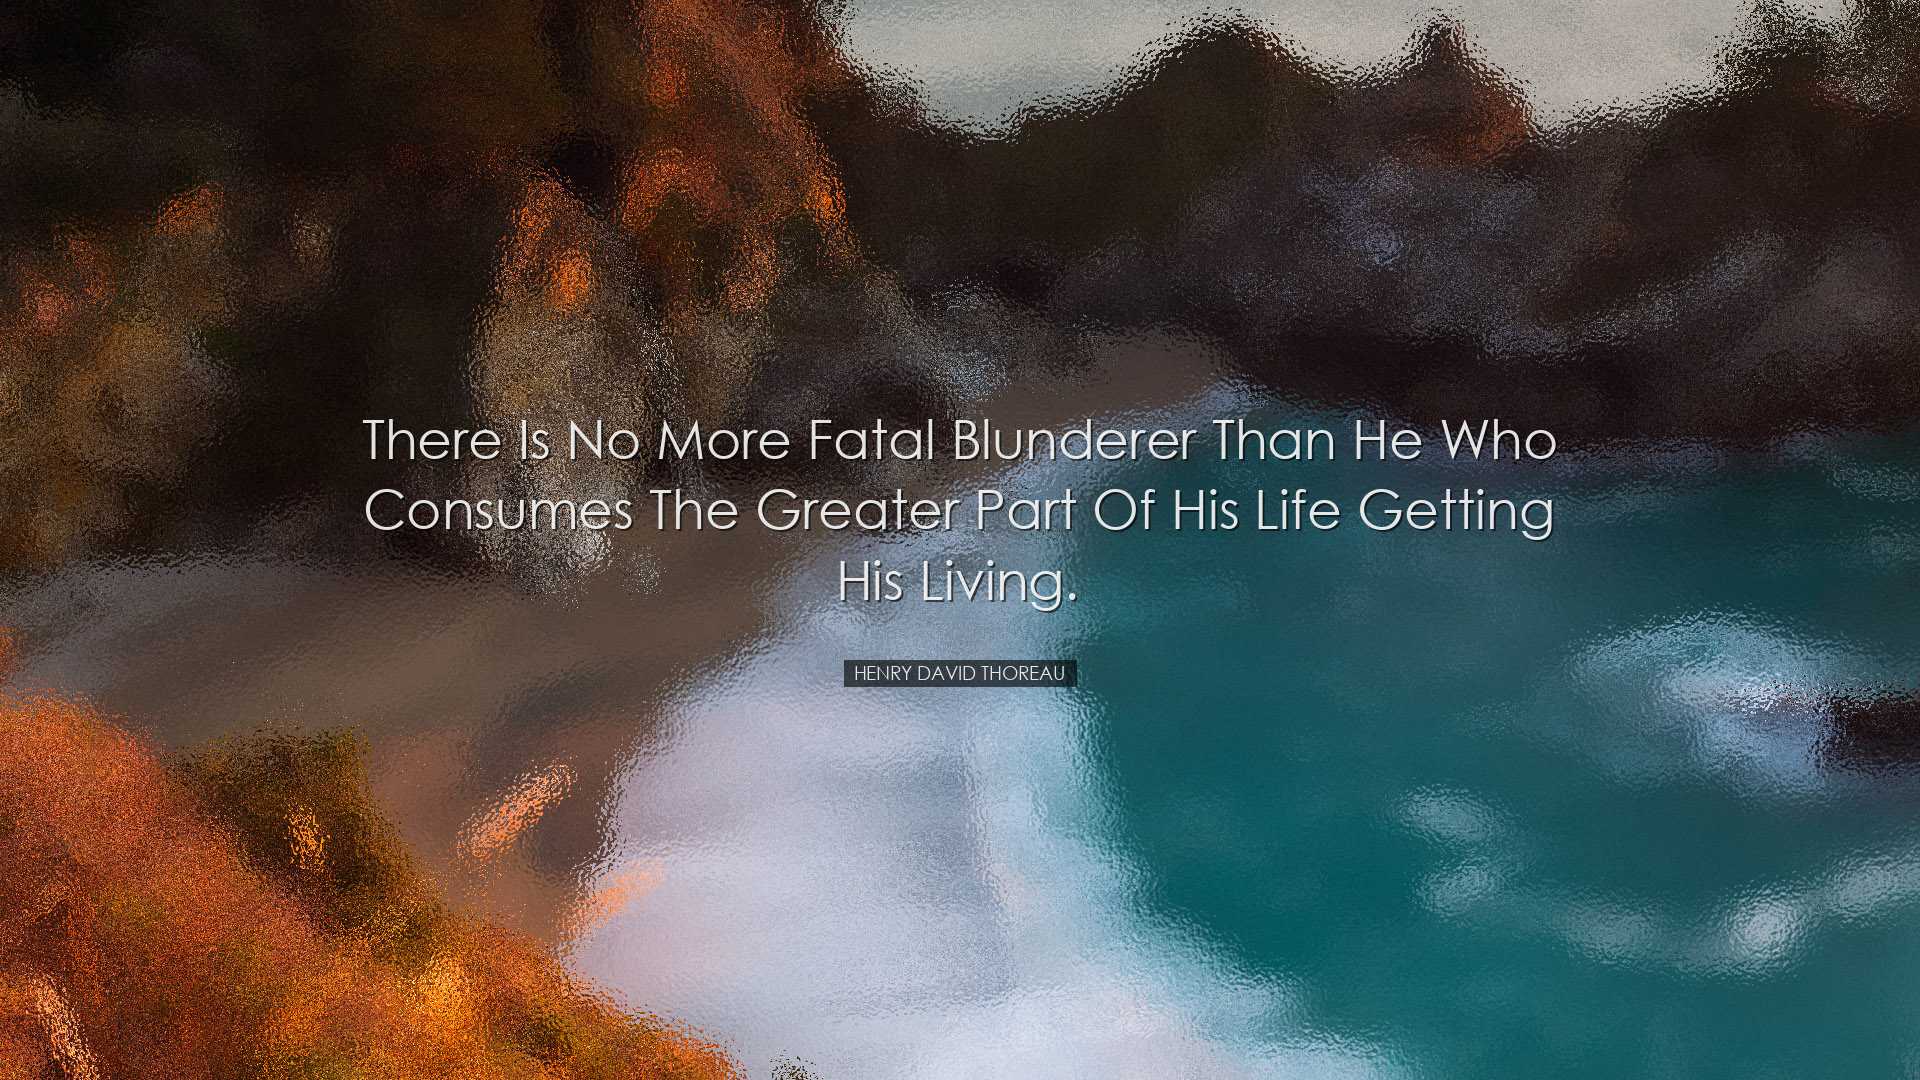 There is no more fatal blunderer than he who consumes the greater